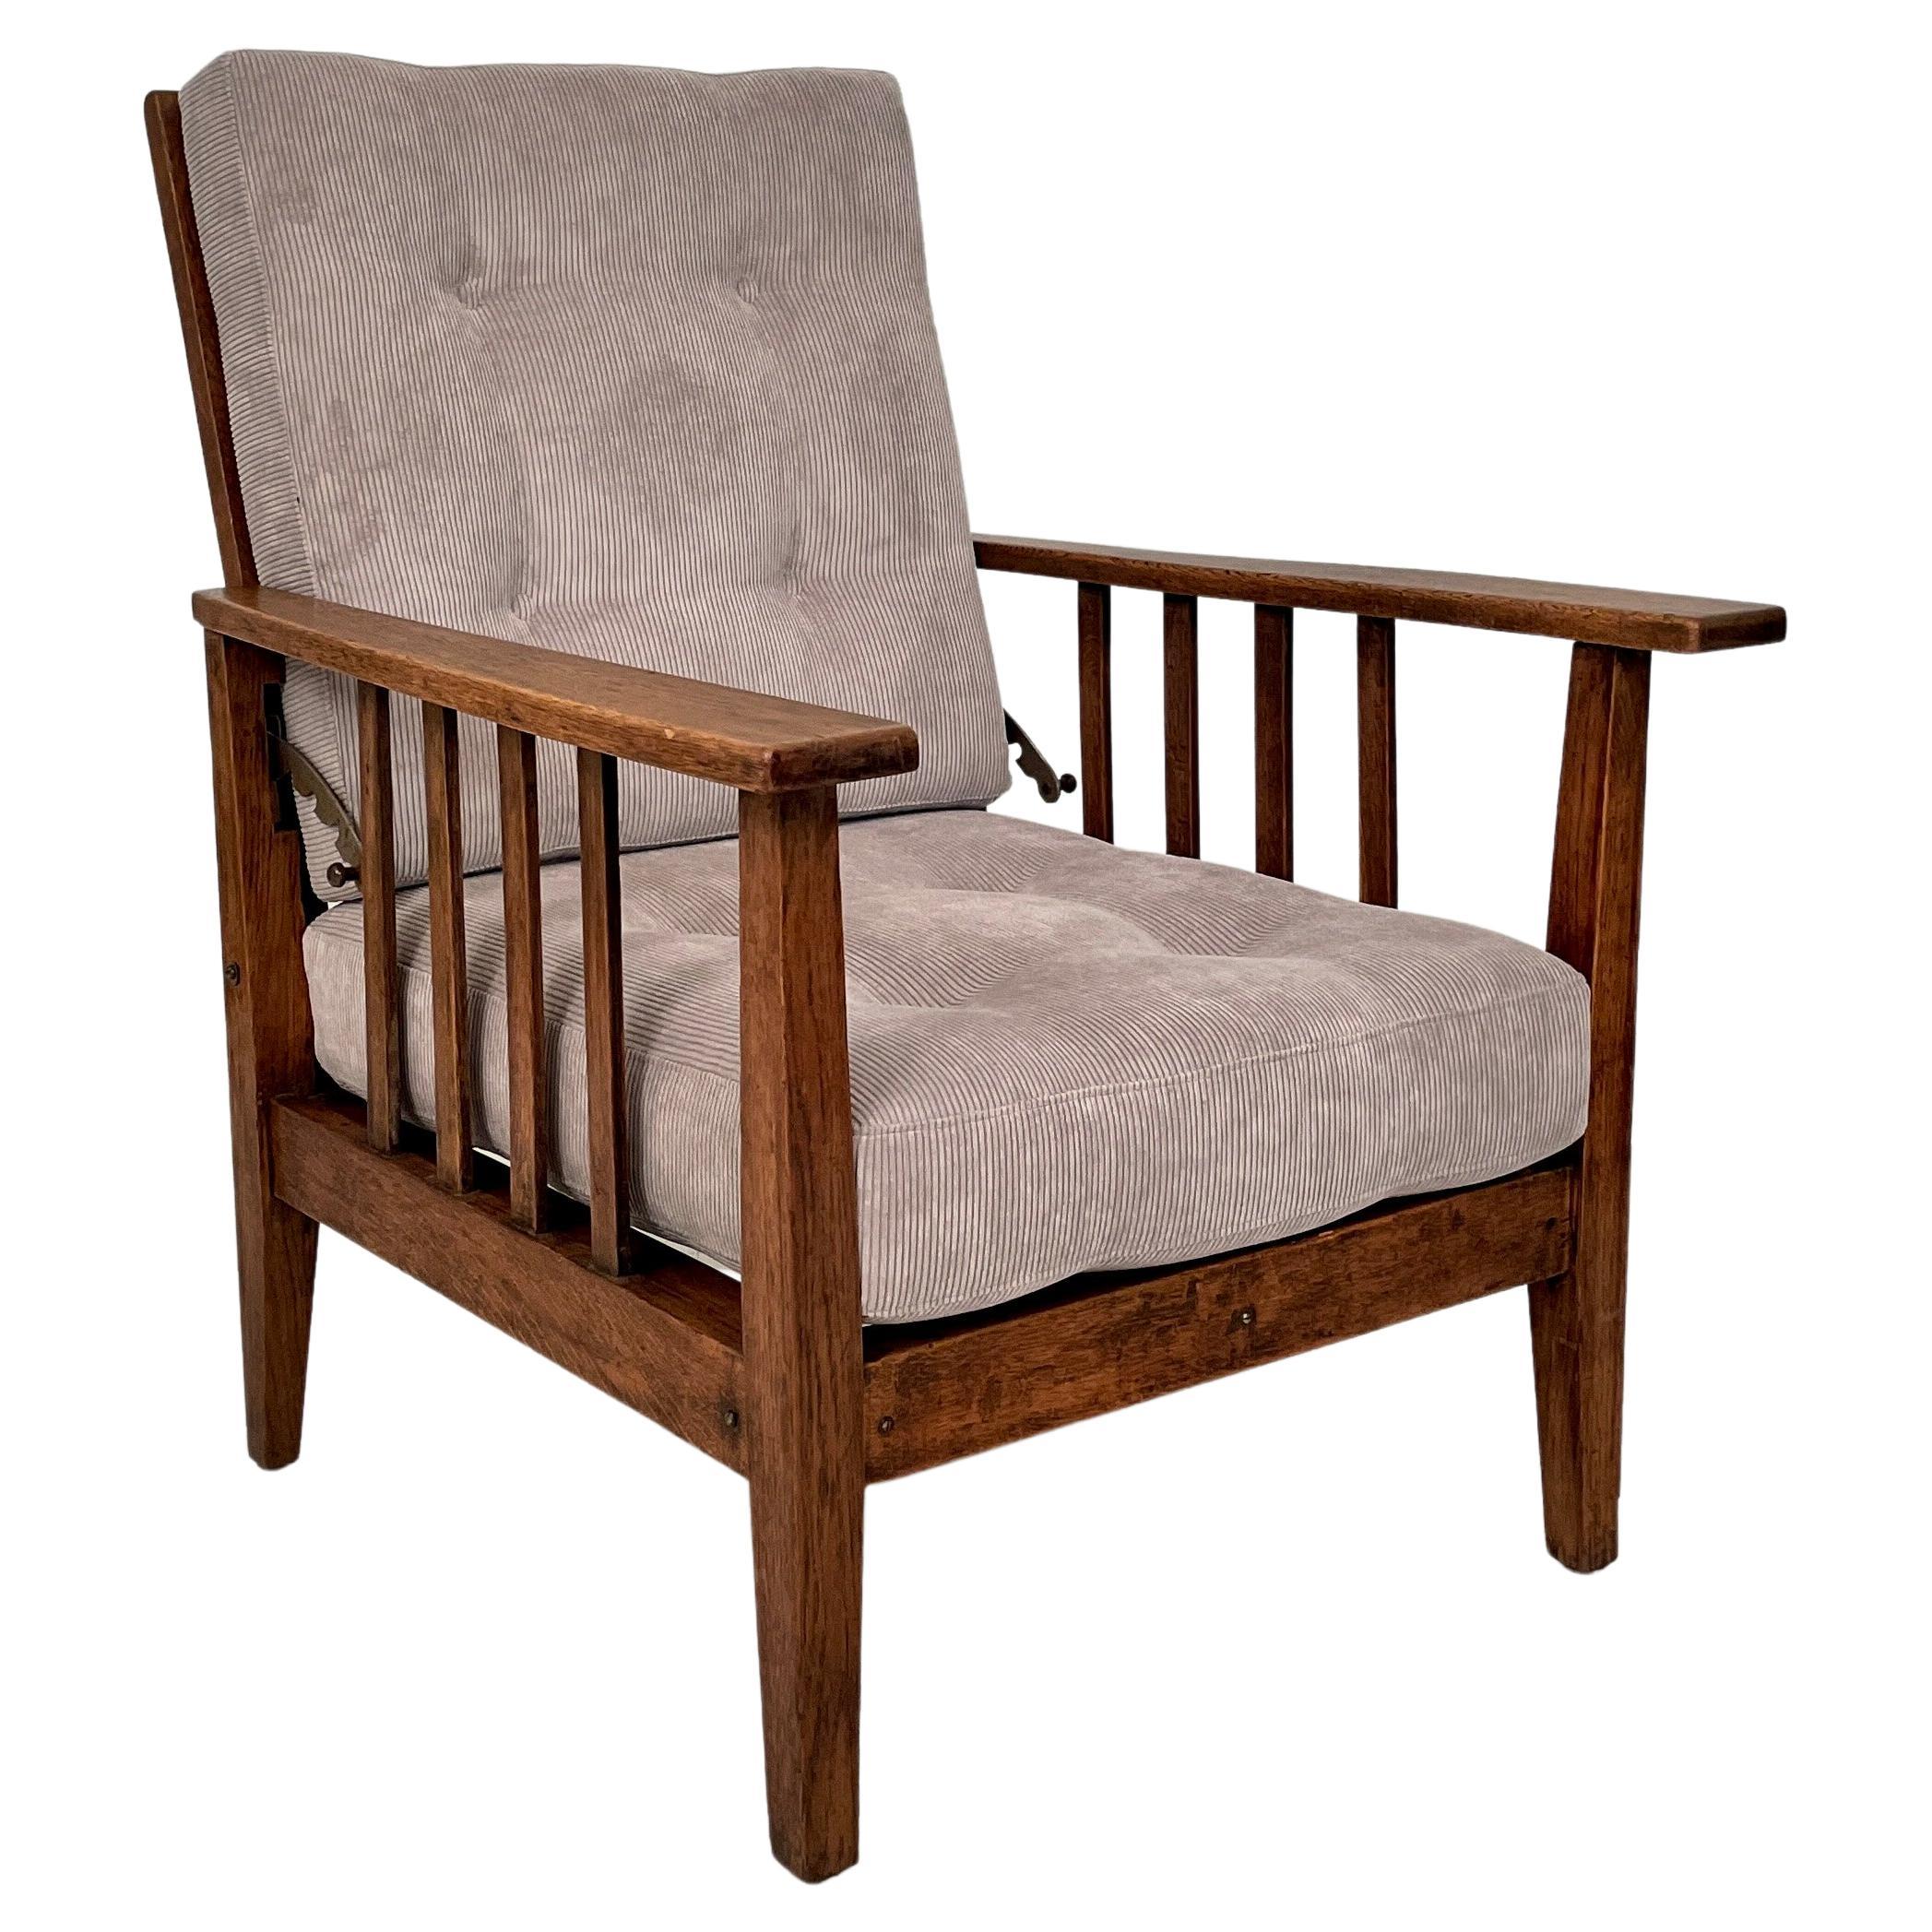 English Arts and Crafts Morris Armchair in Oak Upholstered in Grey Cord, 1910